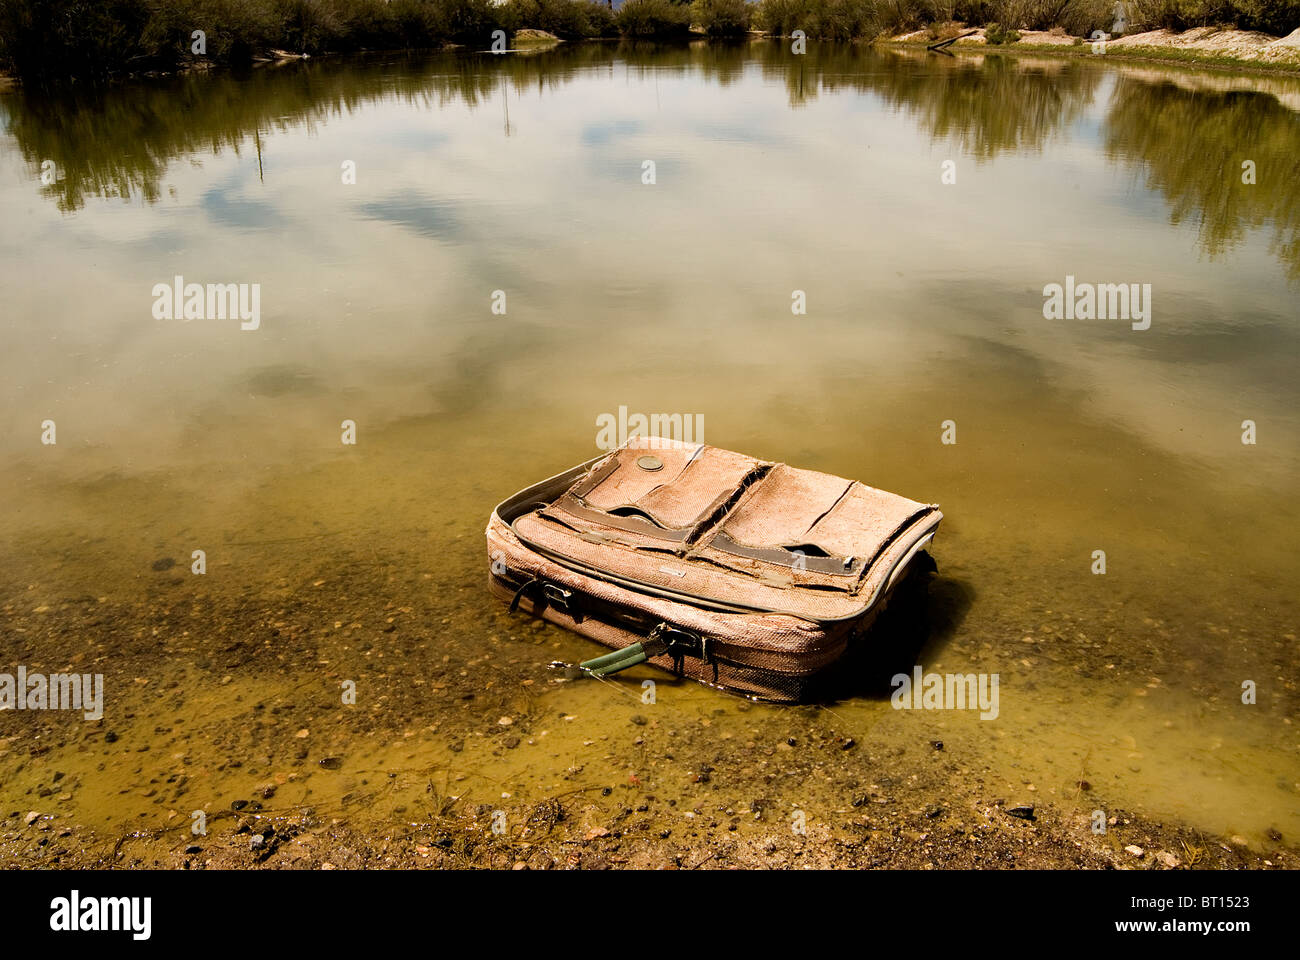 Old American Flyer travel suitcase discarded in the lake.Trashed suitcase. Lost dream. No plans. Travel luggage left behind. American Flyer bag. Stock Photo